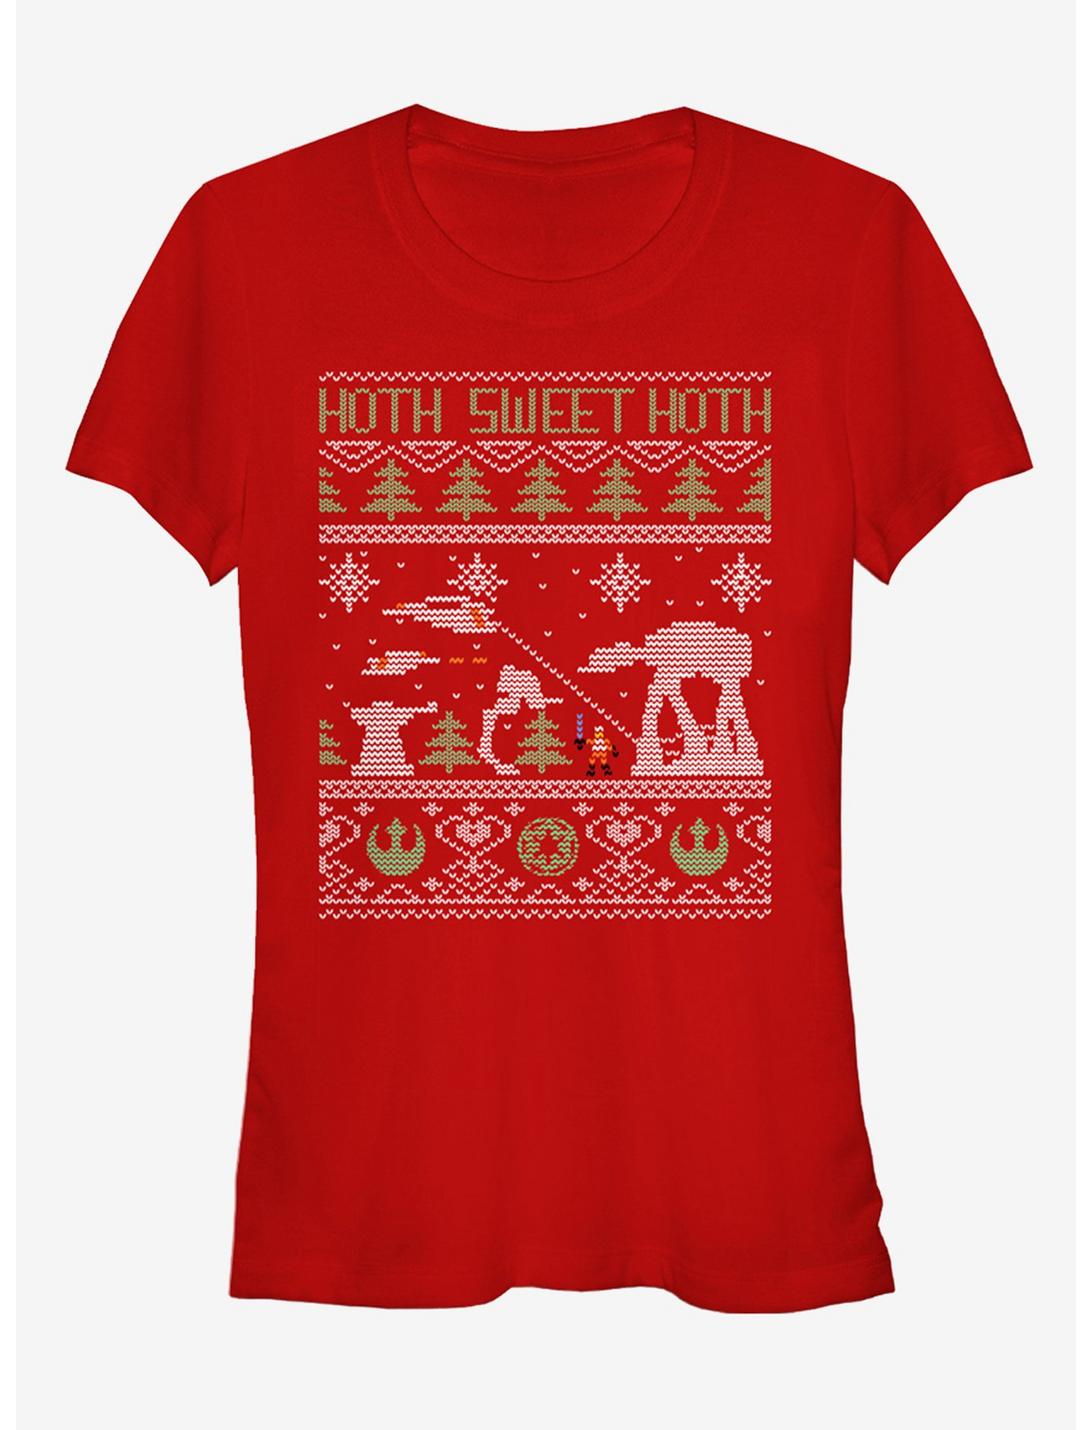 Star Wars Hoth Sweet Hoth Ugly Christmas Sweater Girls T-Shirt, RED, hi-res